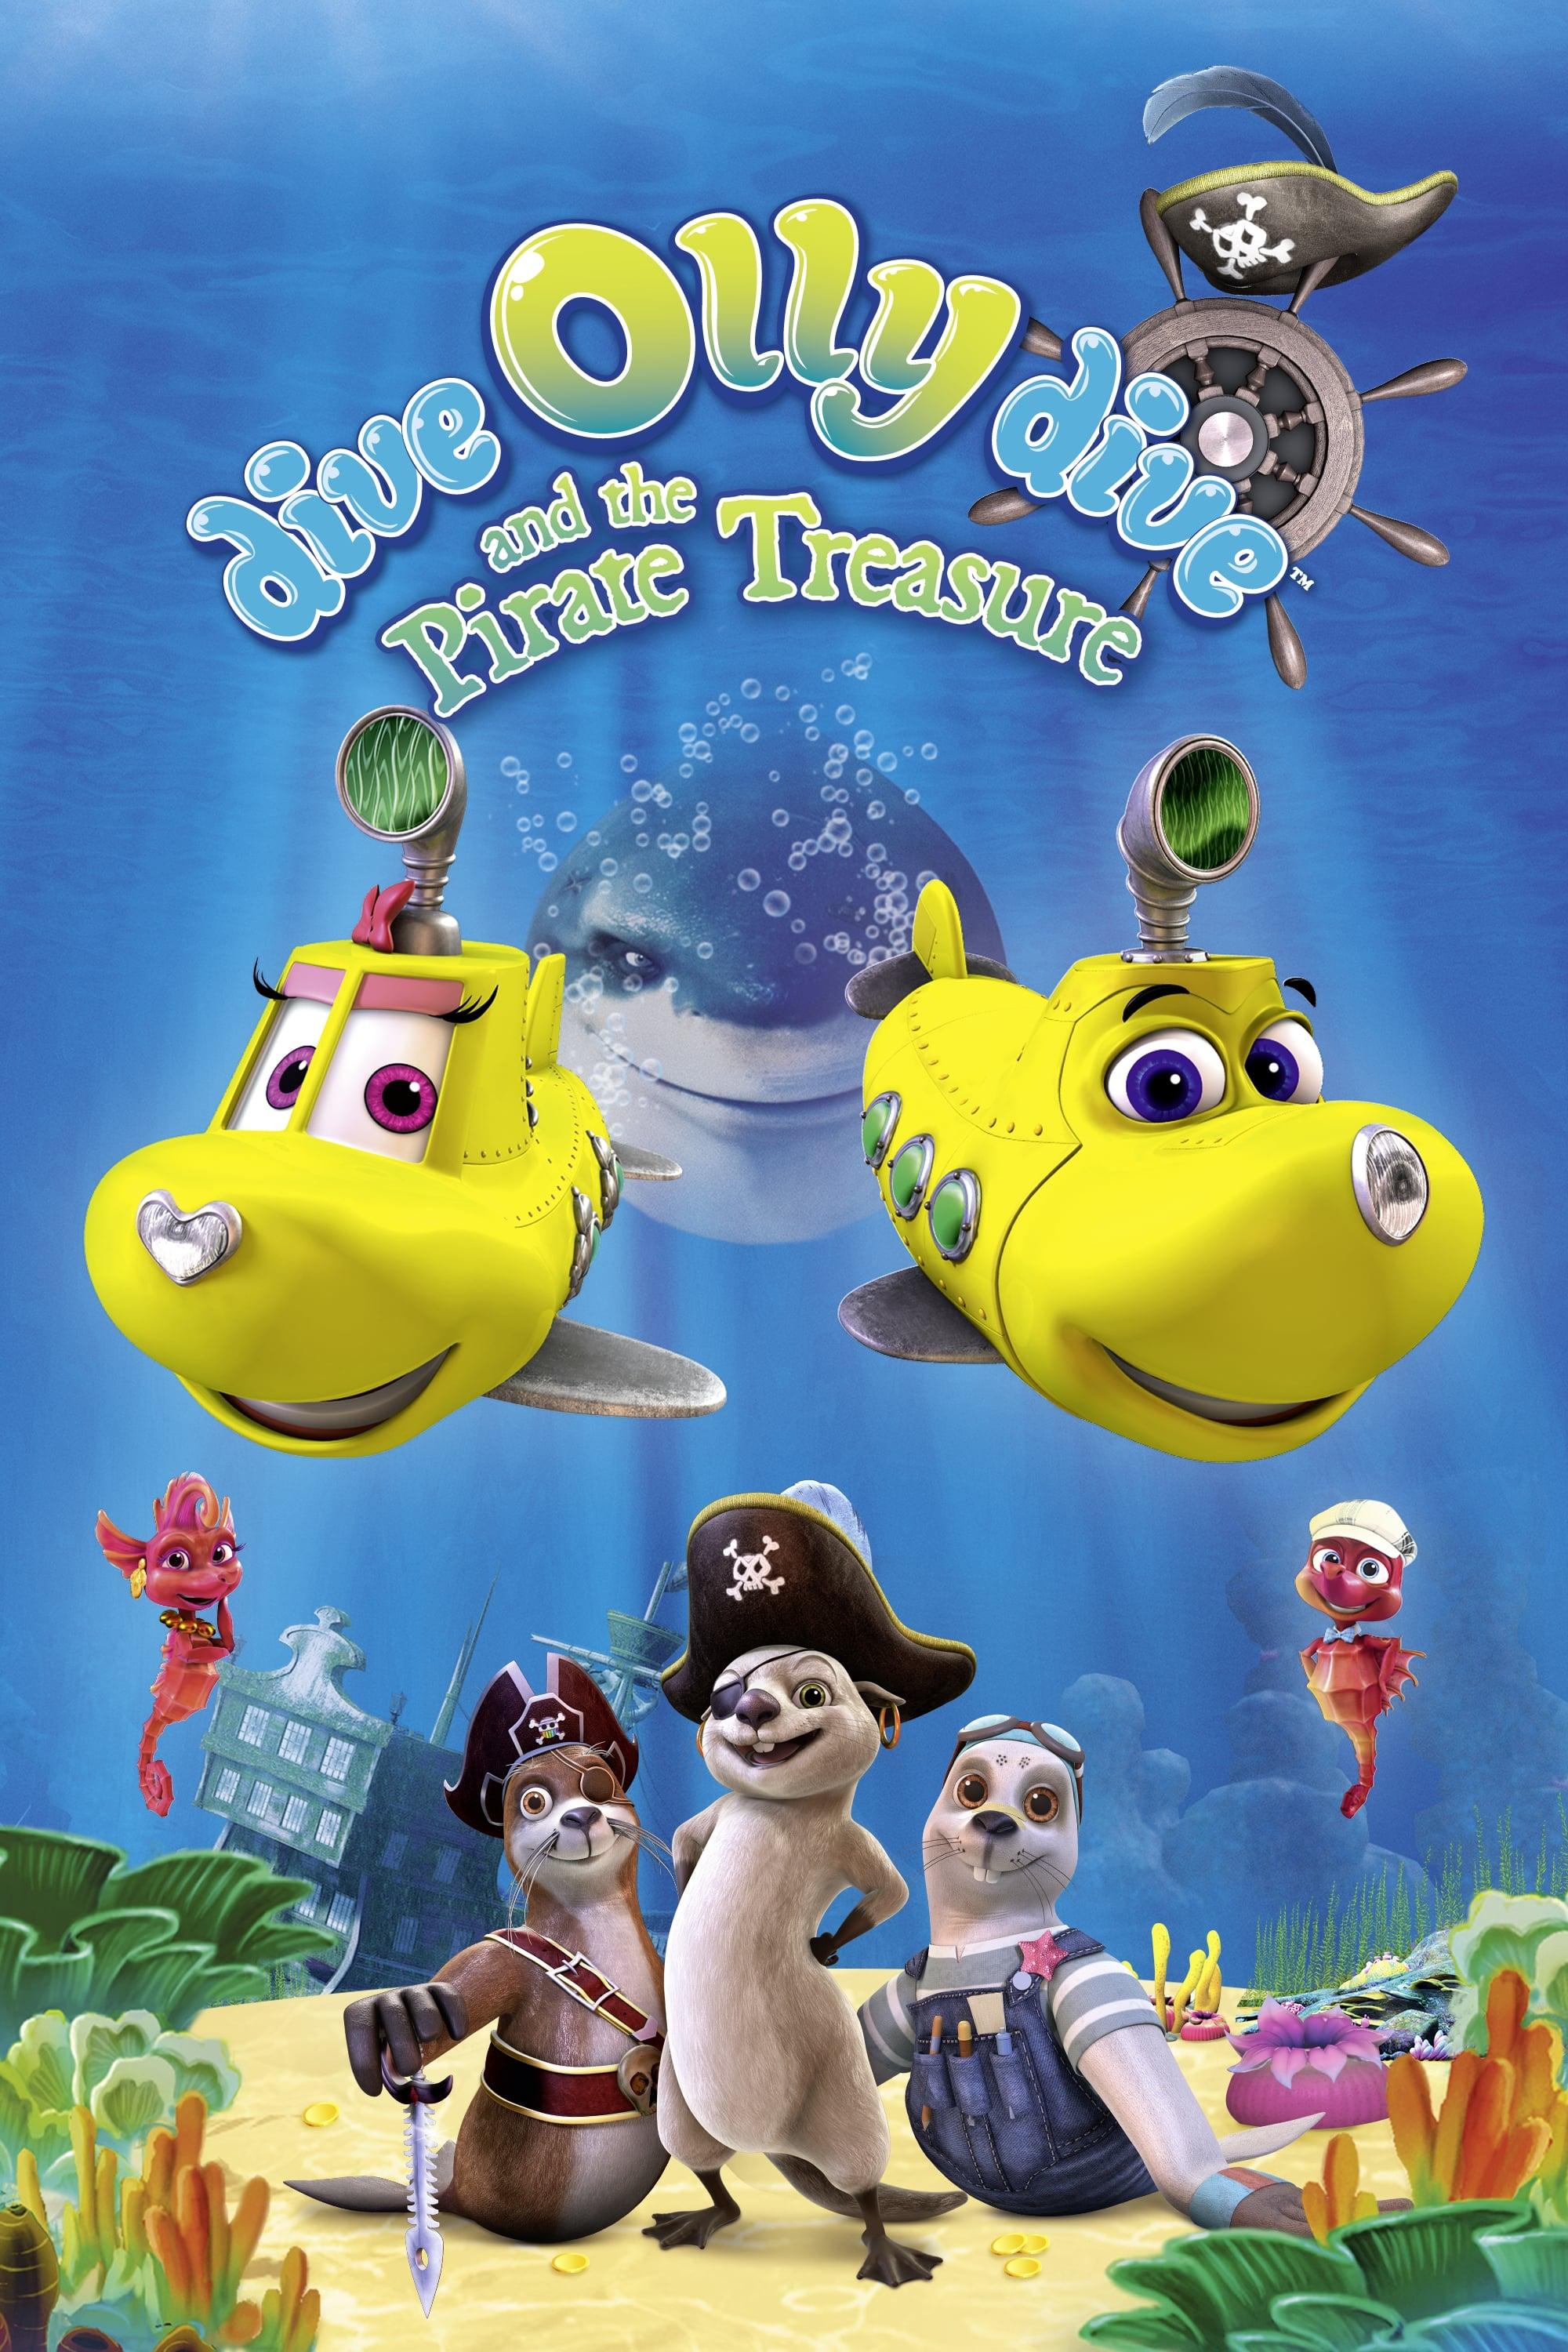 Dive Olly Dive and the Pirate Treasure poster